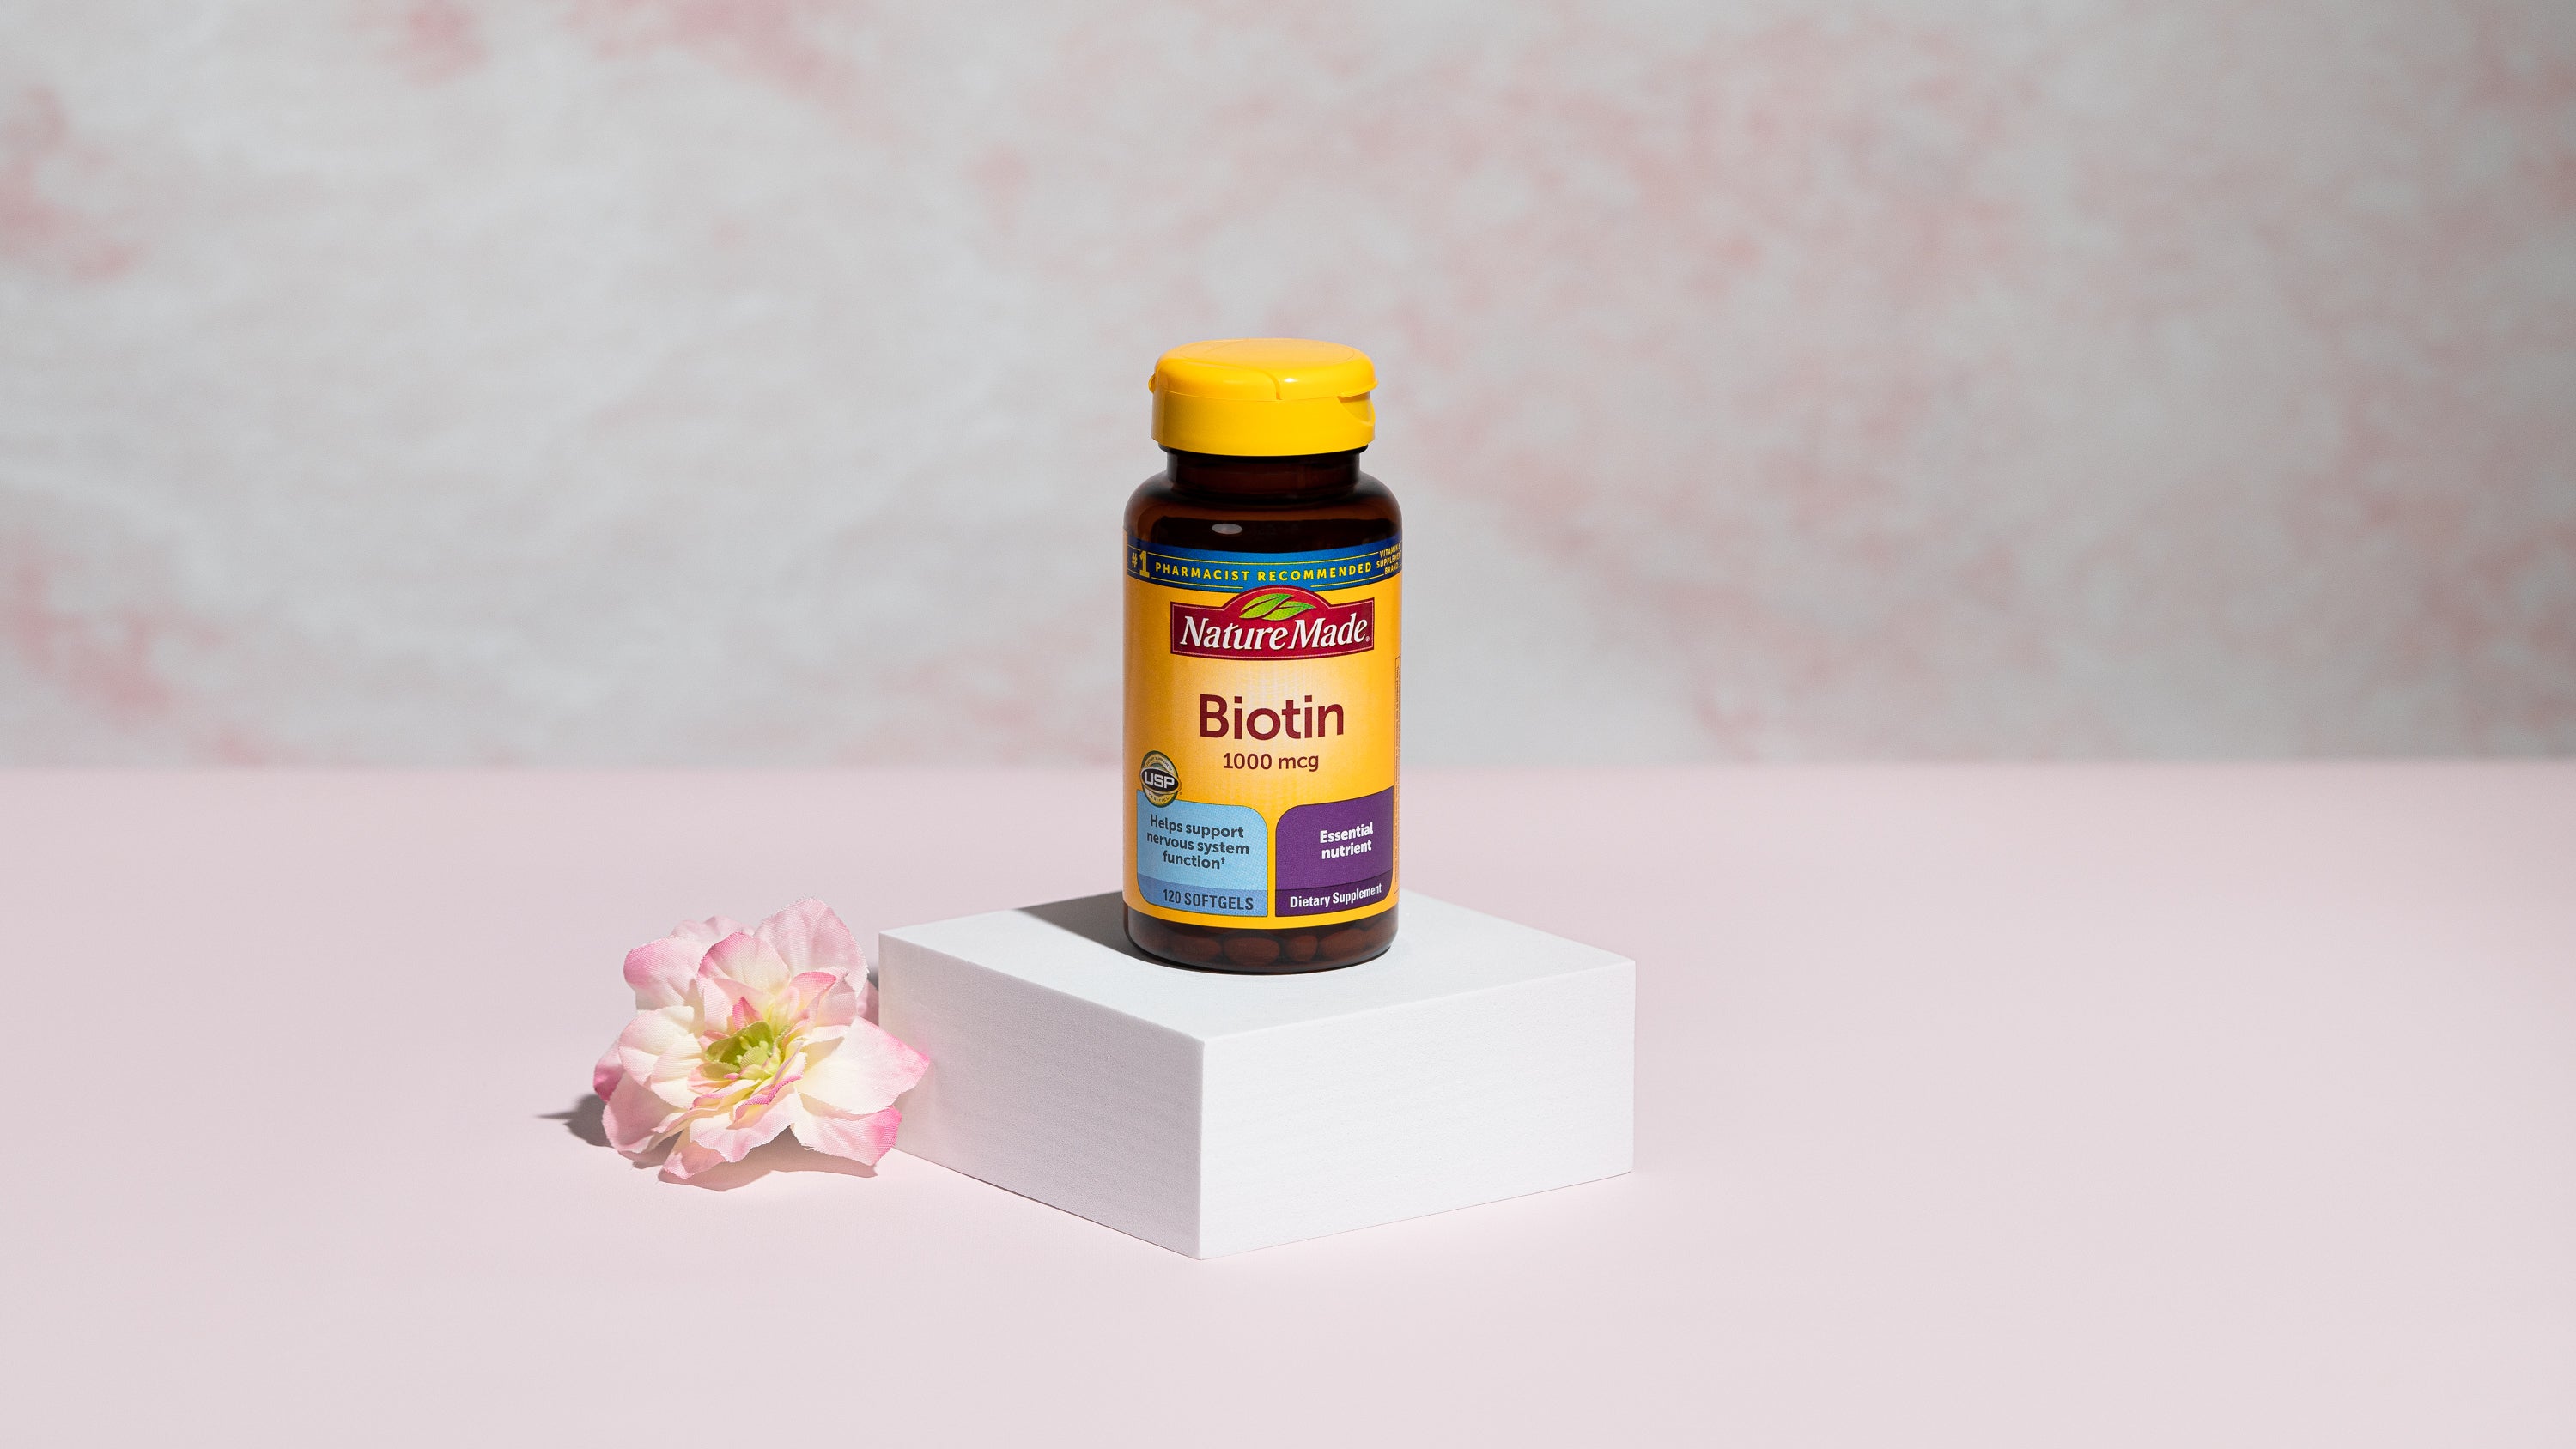 How much biotin can a 17 year old take?